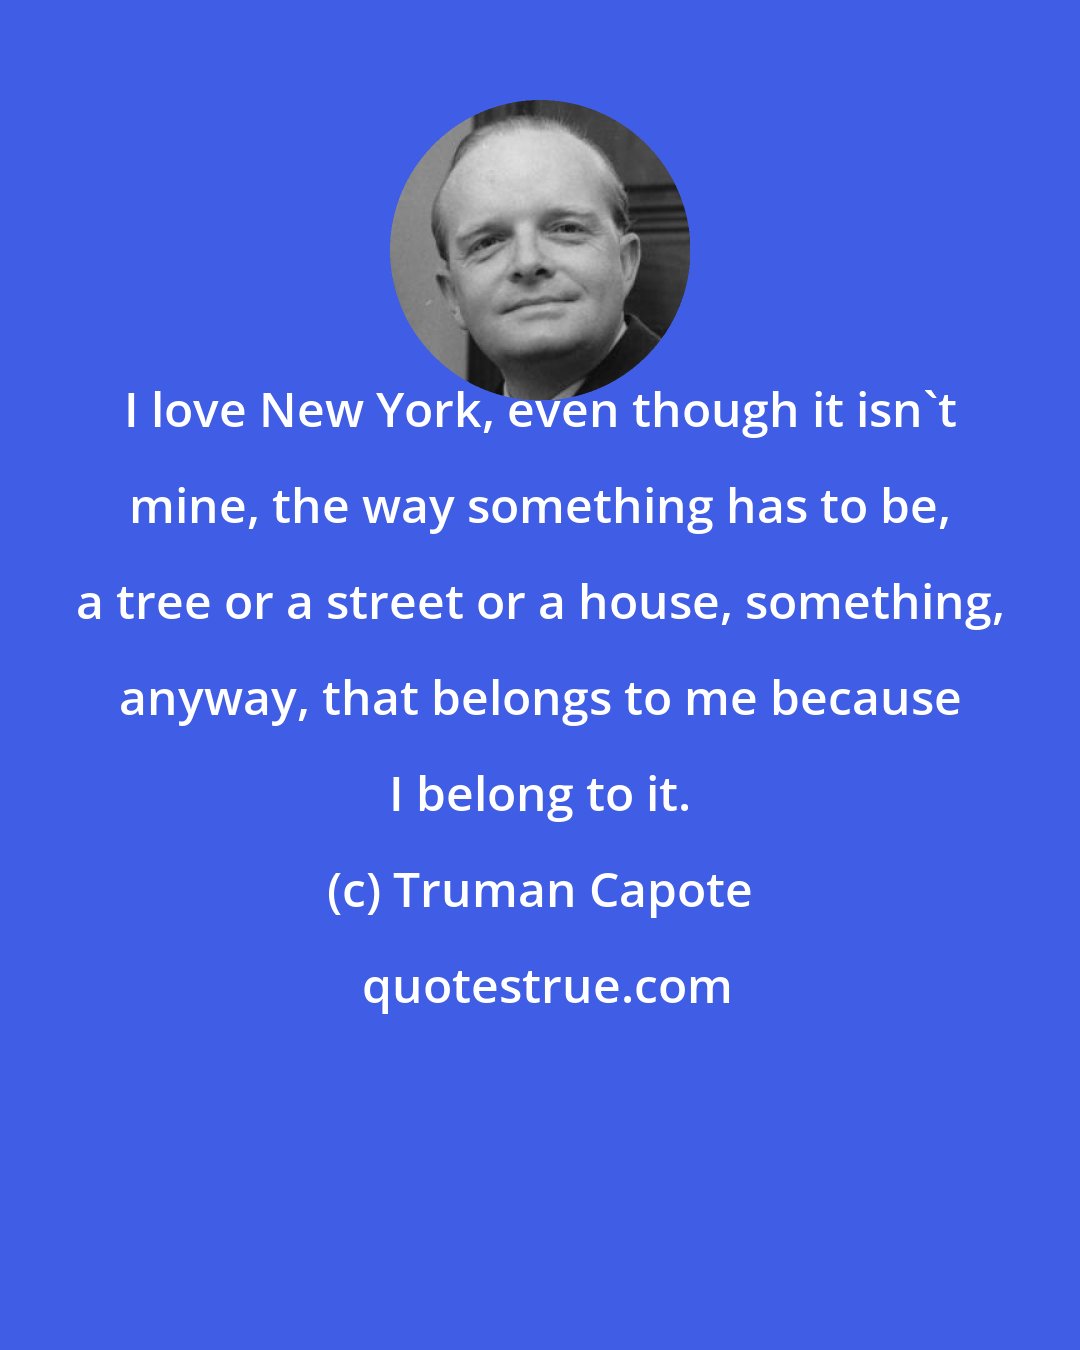 Truman Capote: I love New York, even though it isn't mine, the way something has to be, a tree or a street or a house, something, anyway, that belongs to me because I belong to it.